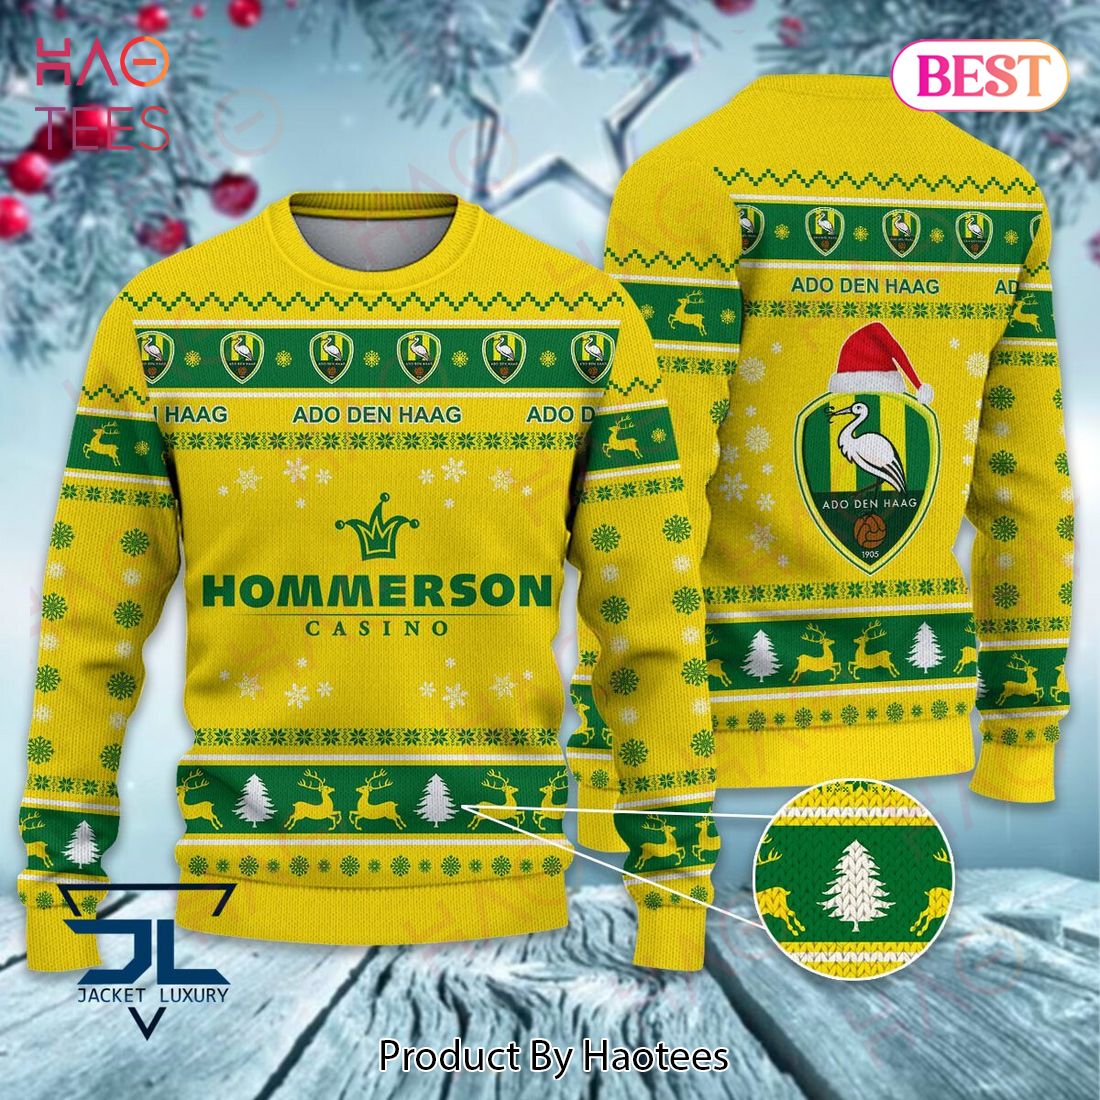 ADO Den Haag Christmas Luxury Brand Sweater Limited Edition